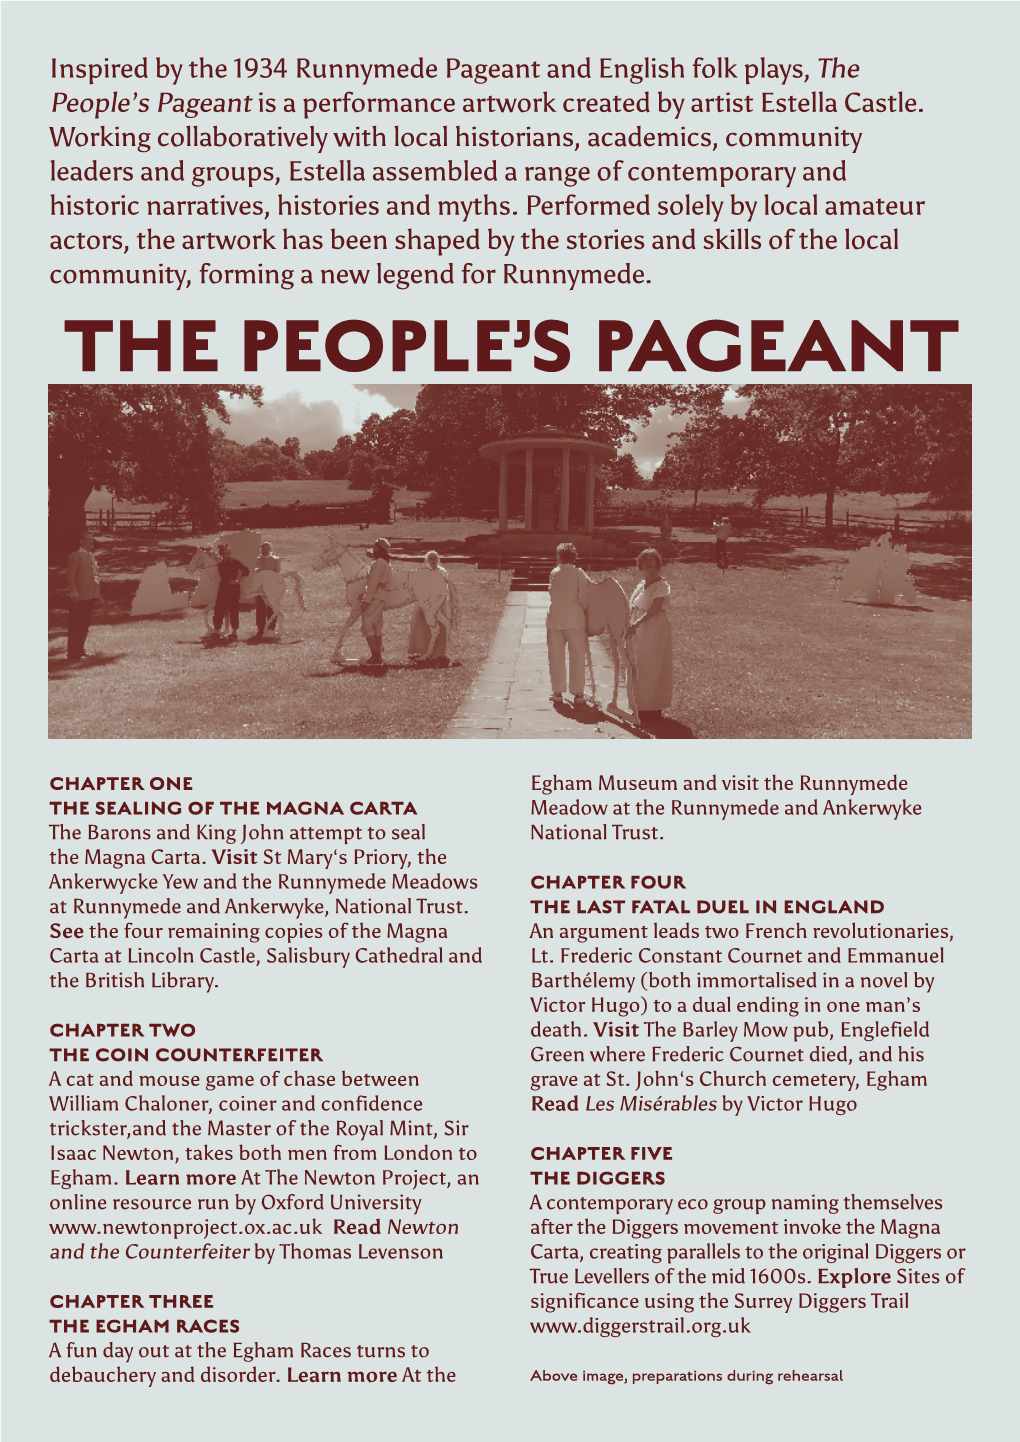 Thepeople's Pageant